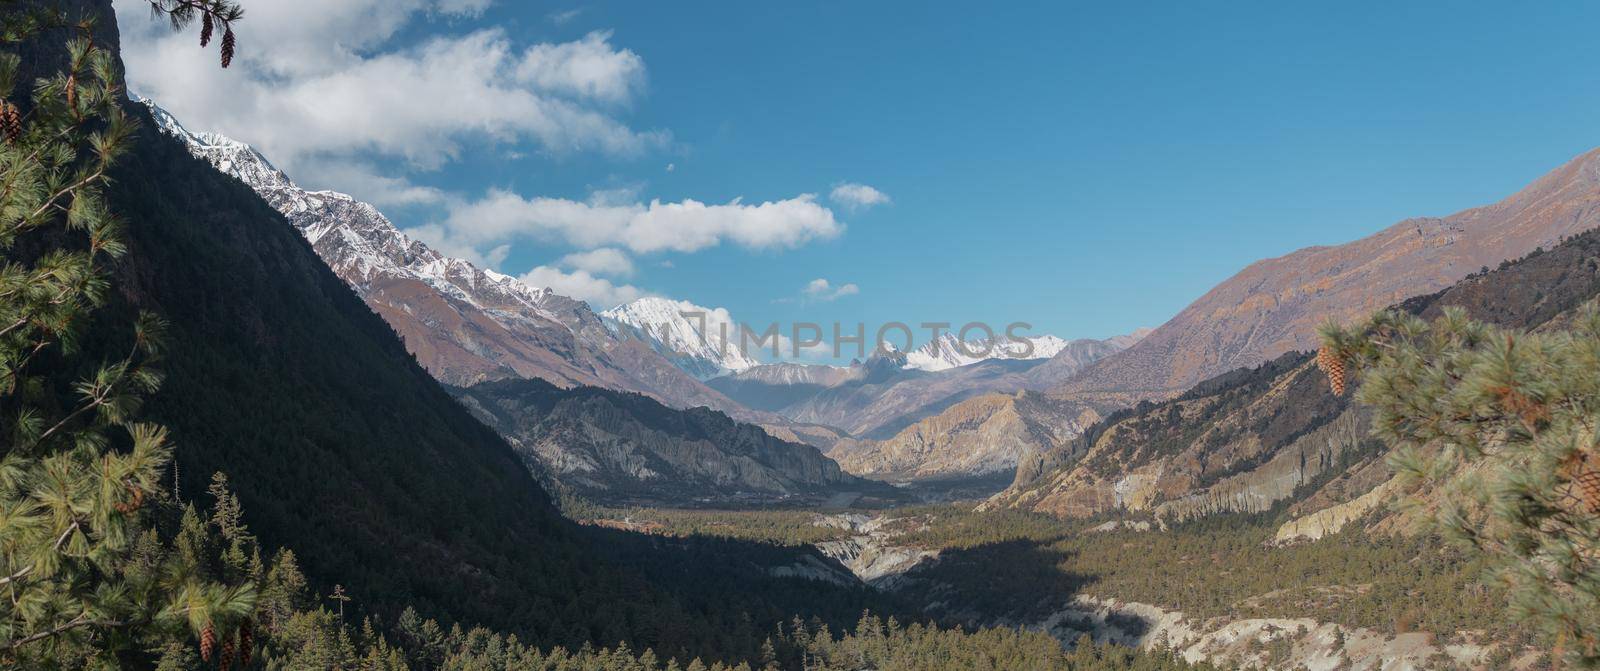 Panorama of mountains trekking Annapurna circuit, Marshyangdi river valley by arvidnorberg